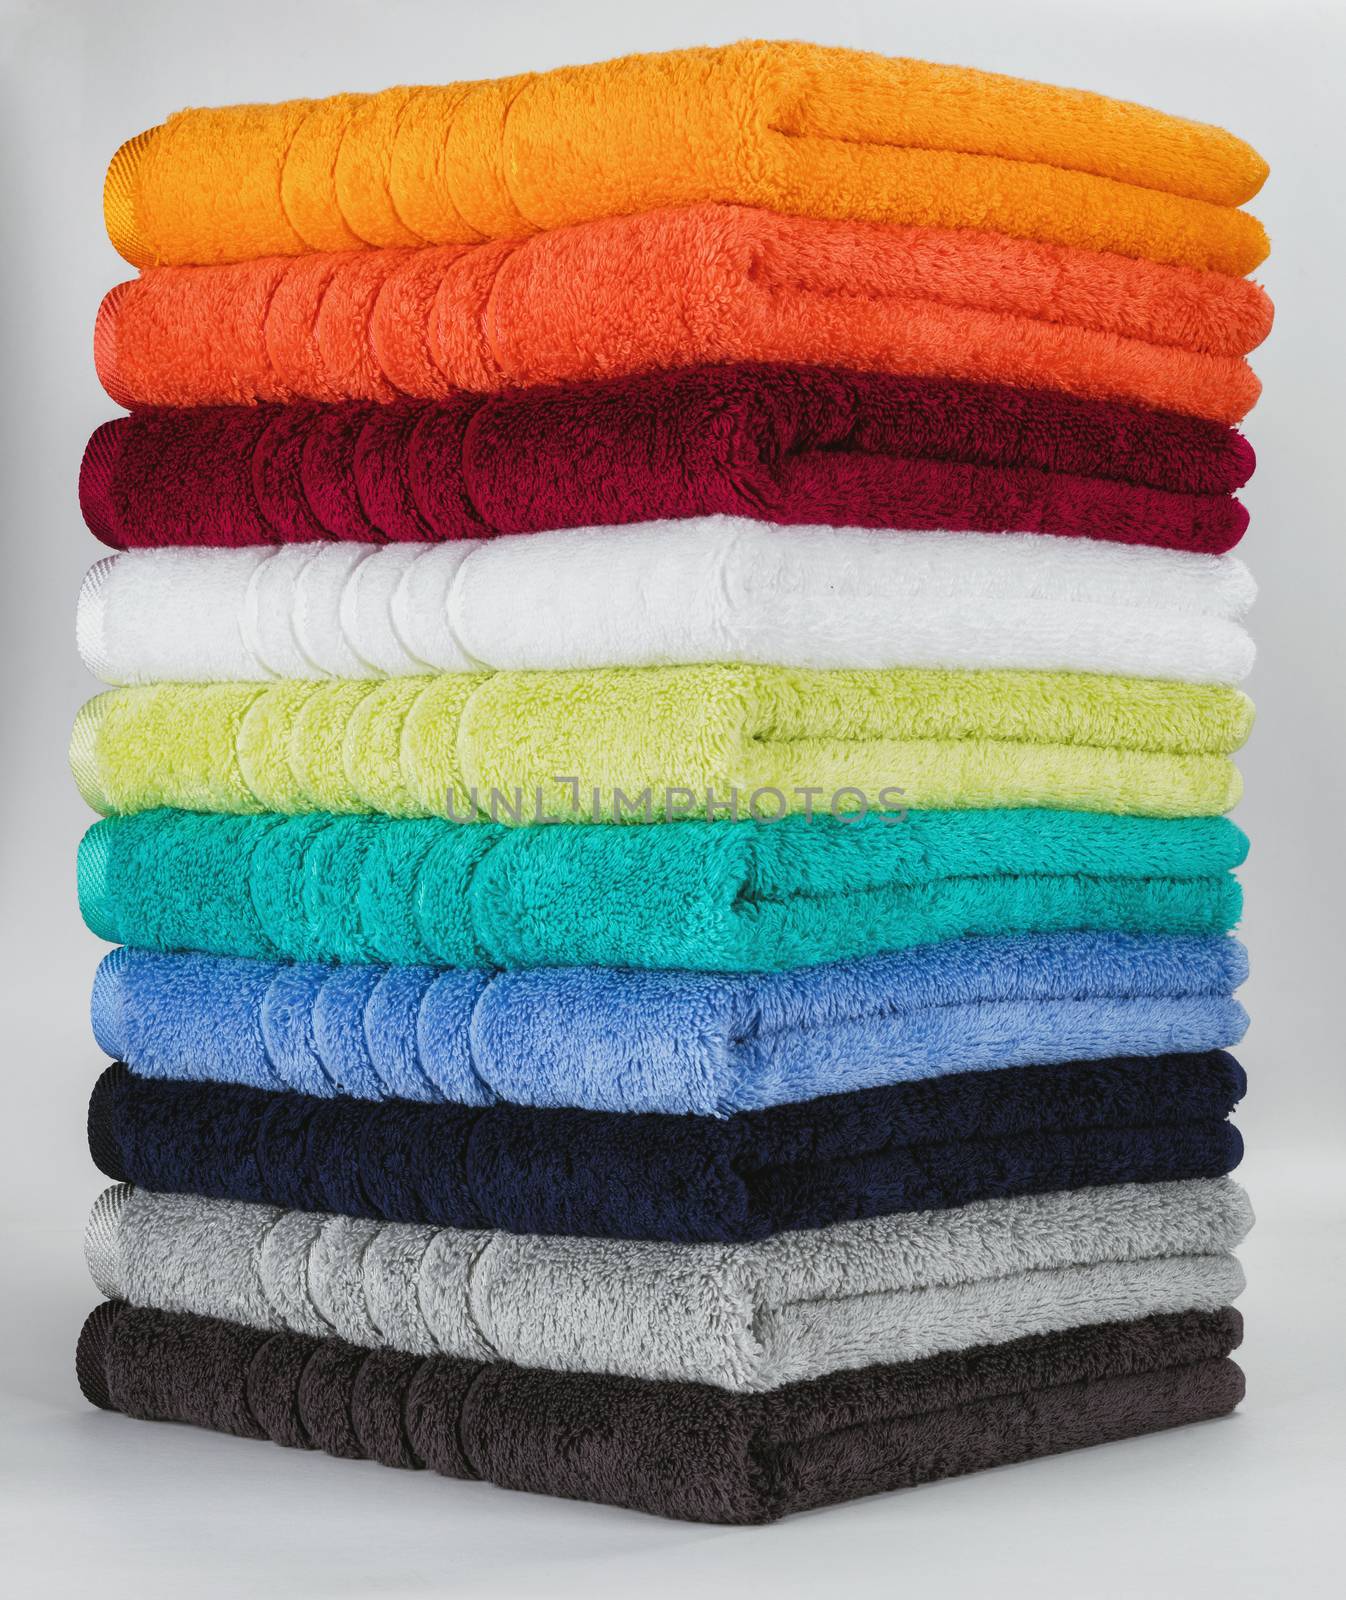 Multicolored towels on a white background by hanusst